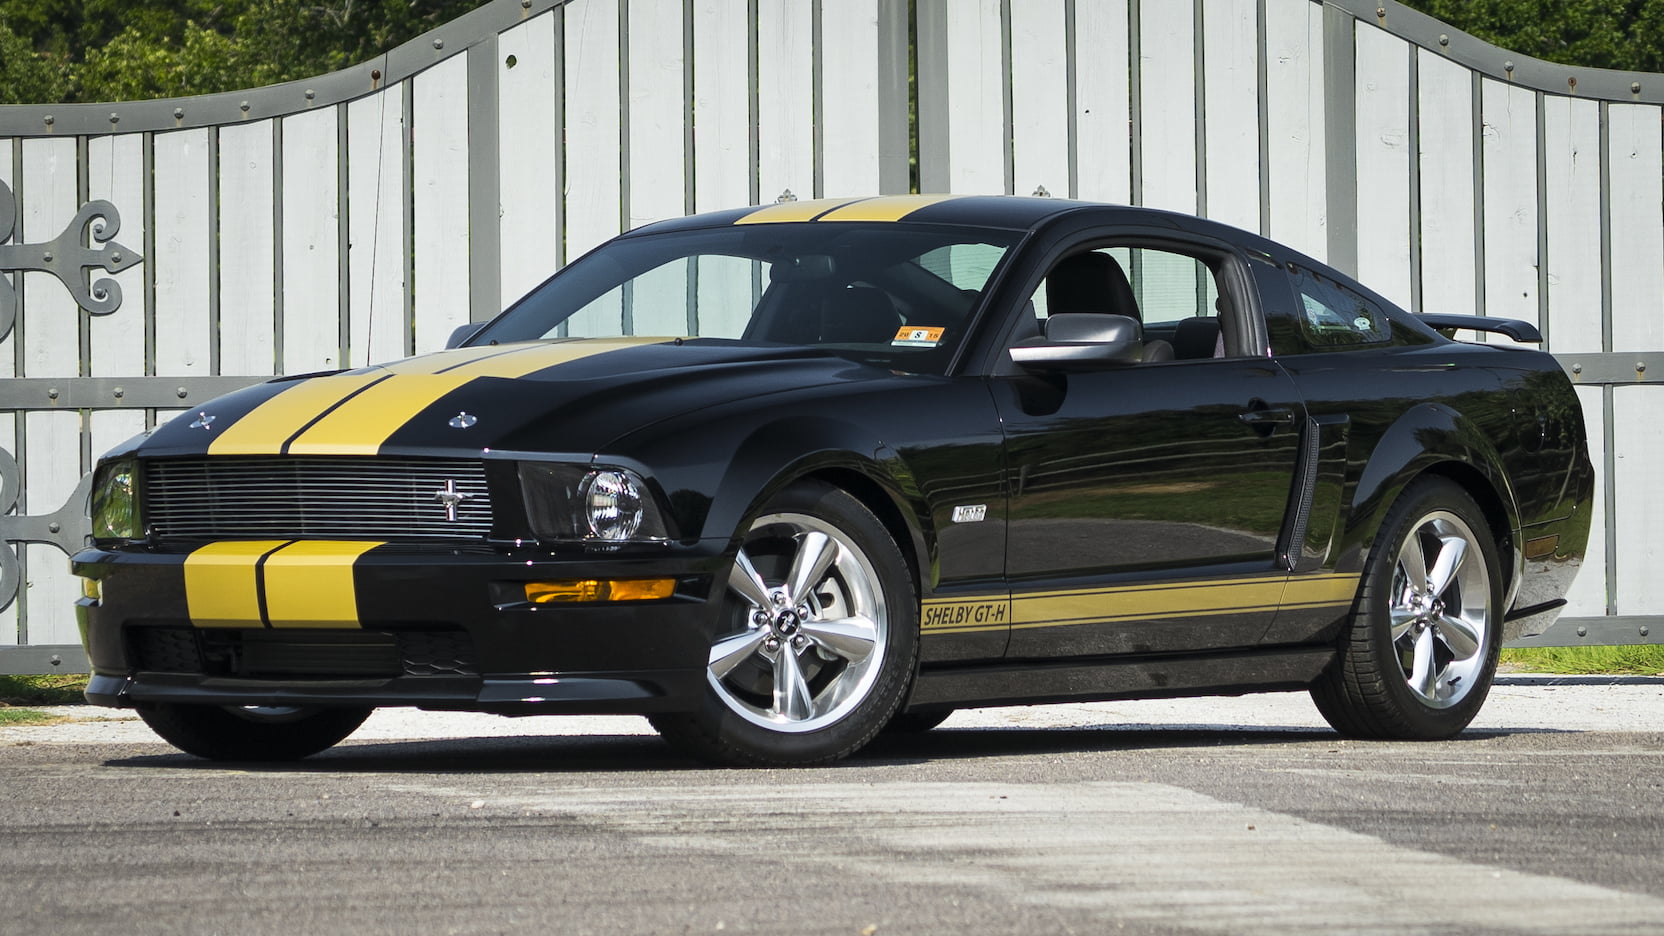 Mustang Of The Day: 2006 Ford Mustang Shelby GT Hertz